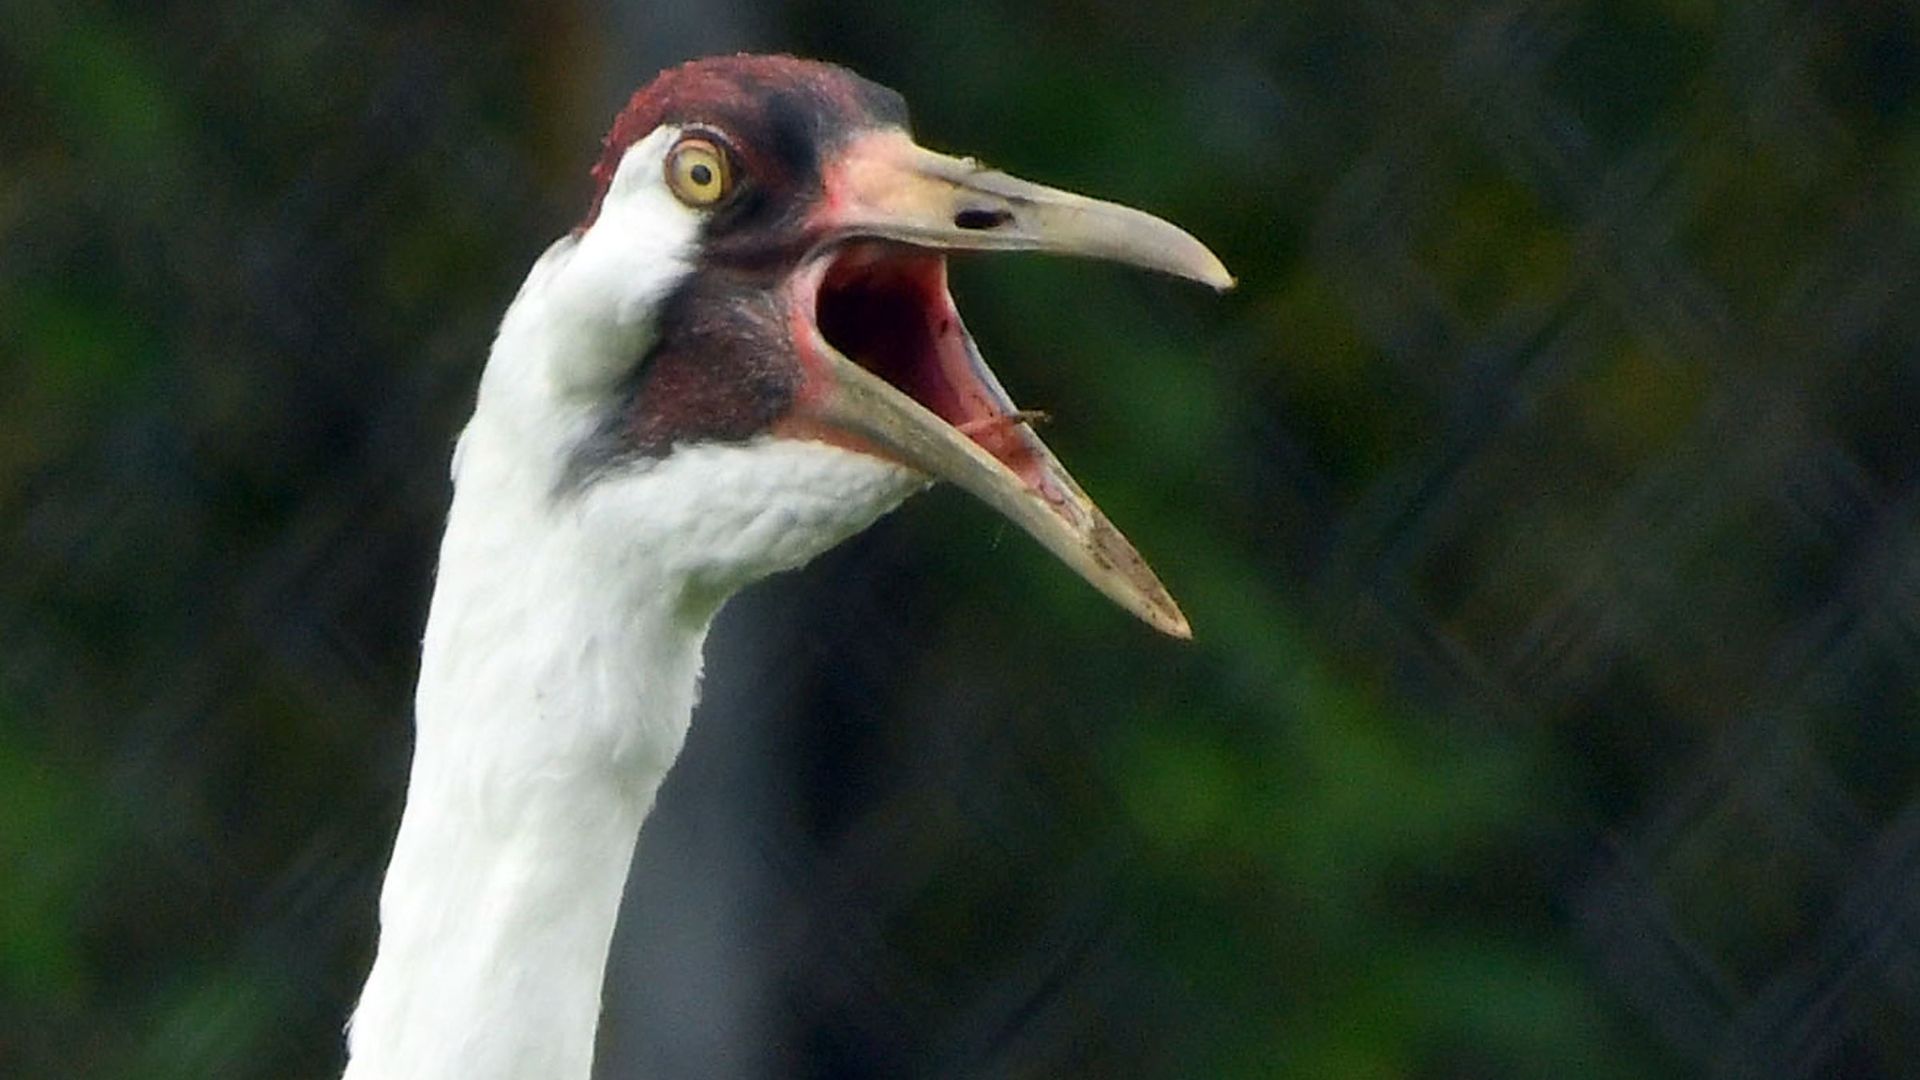 End Of An Era: 50 Year Old Whooping Crane Breeding Program Coming To A Close At Maryland's Patuxent Refuge